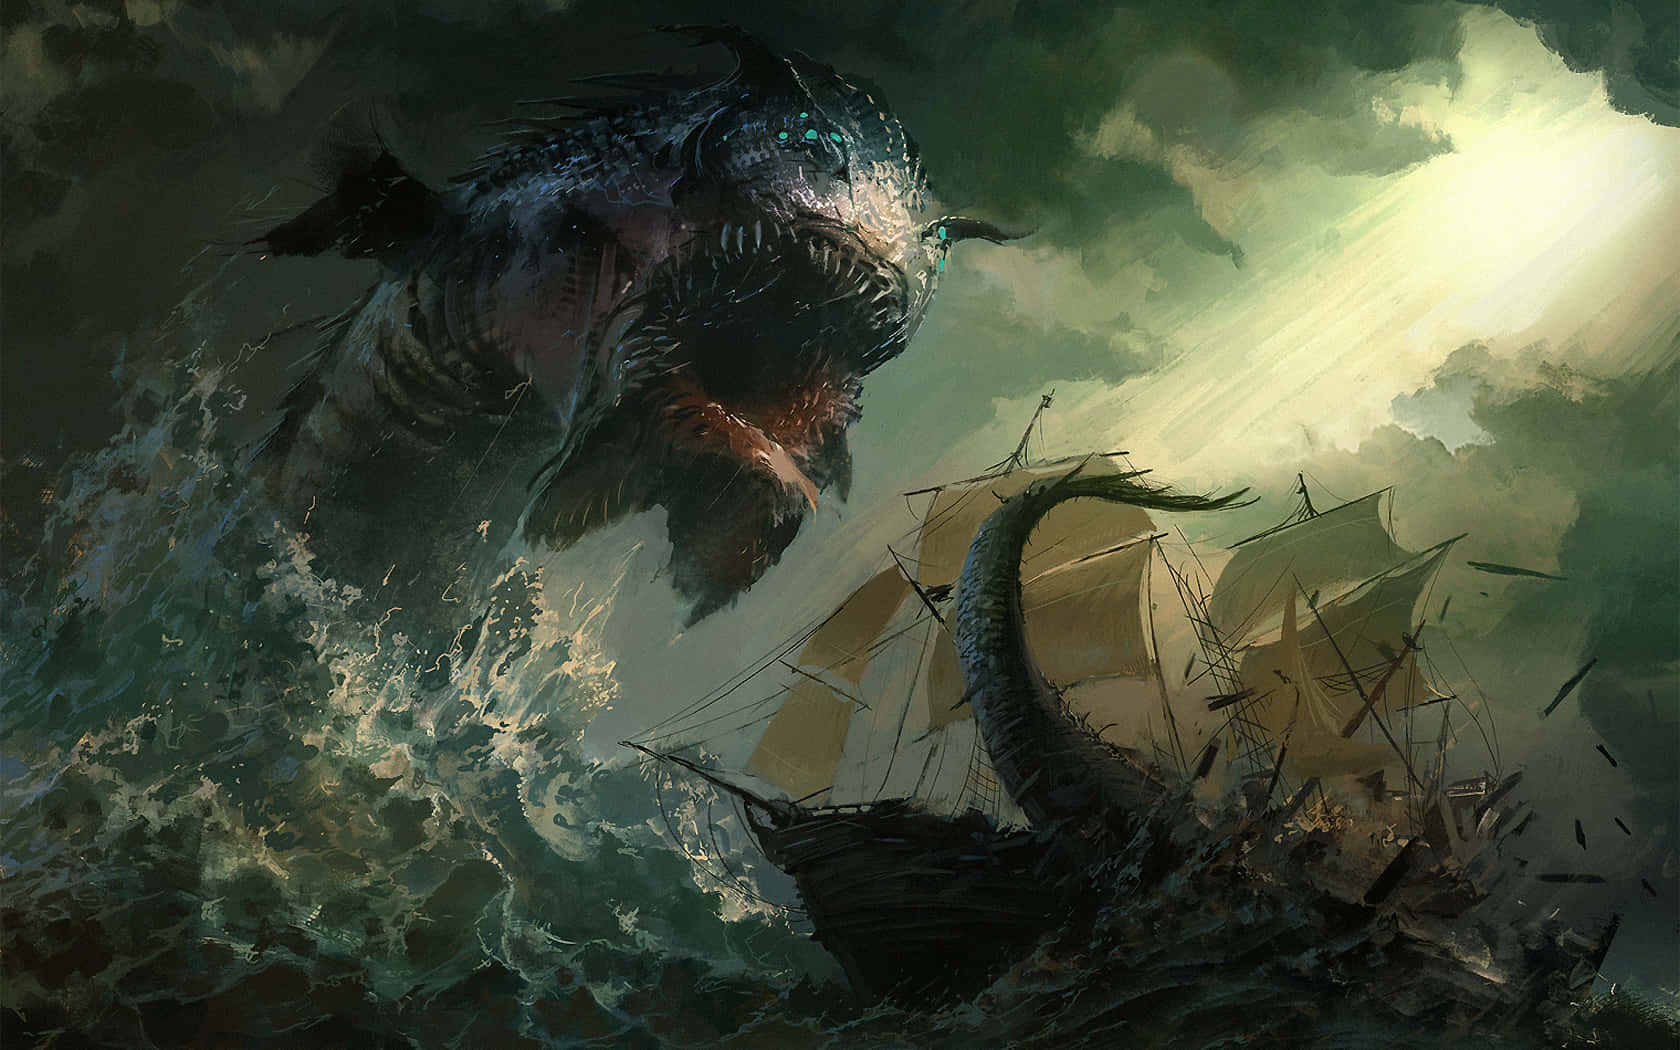 Pirate Ship Scary Ocean Monster Picture 1680 x 1050 Picture